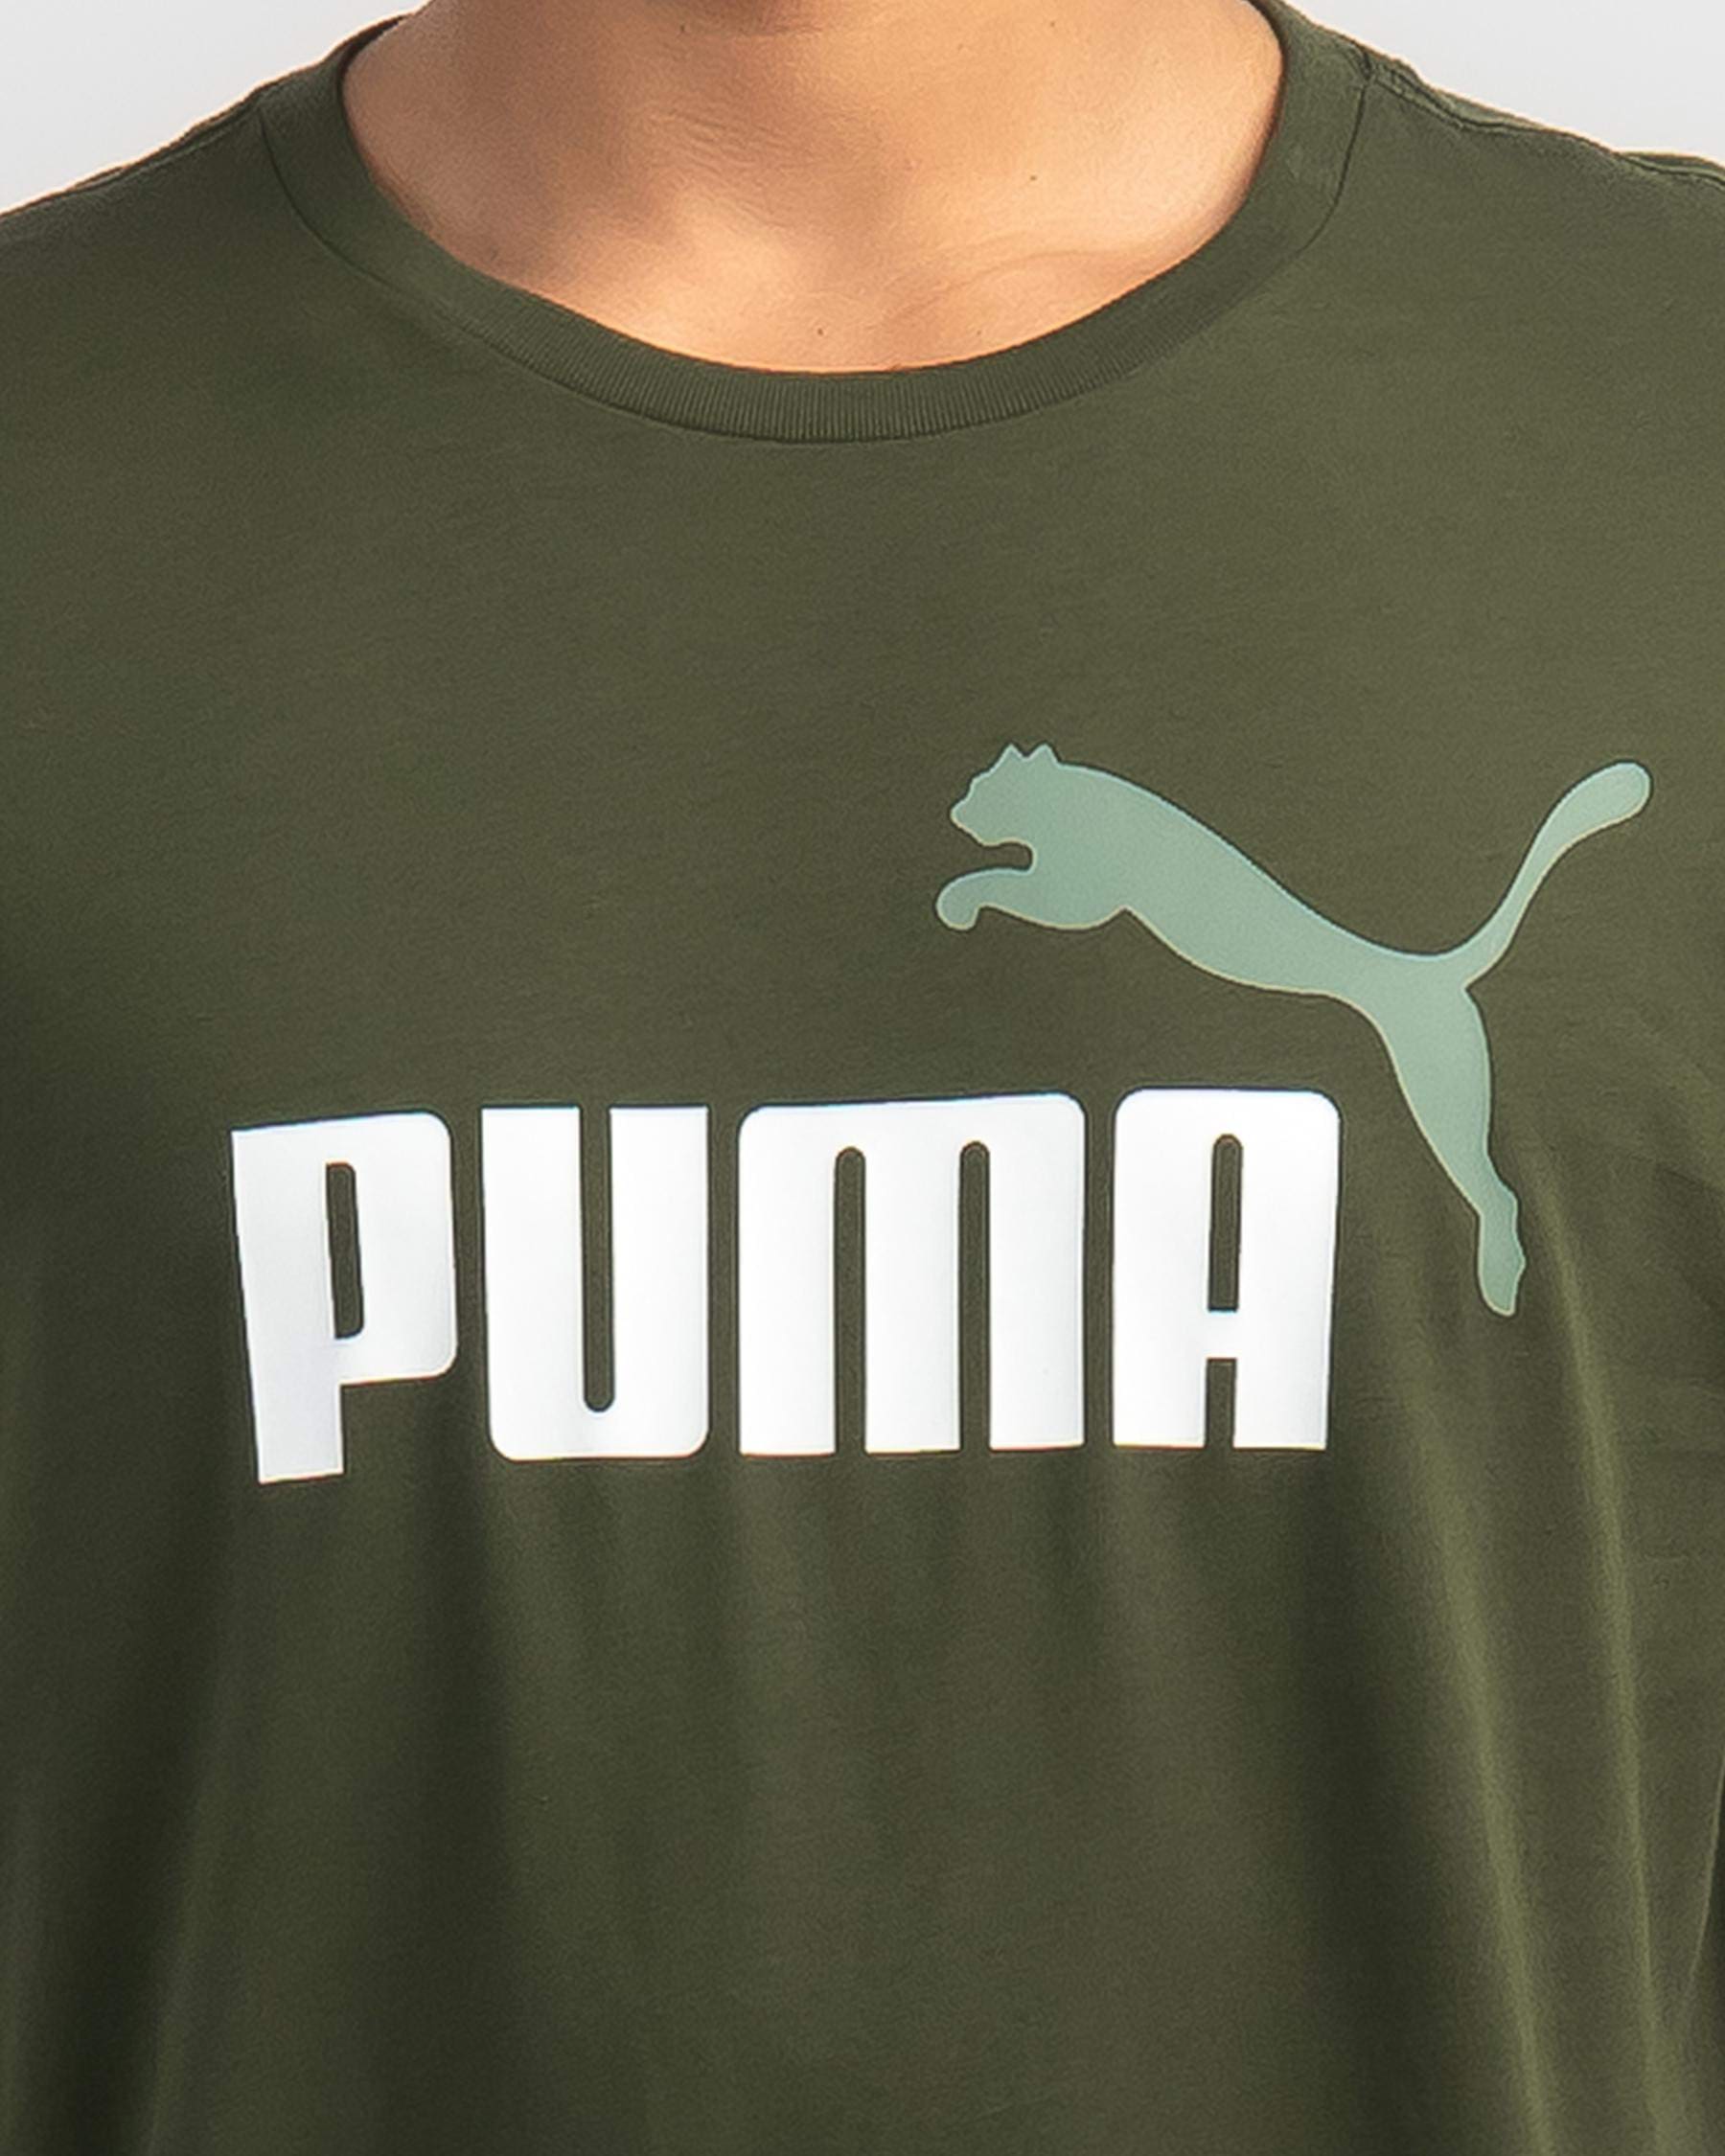 Shipping Returns Easy City - In ESS+2 T-Shirt Myrtle - FREE* Beach States Puma Logo & Col United